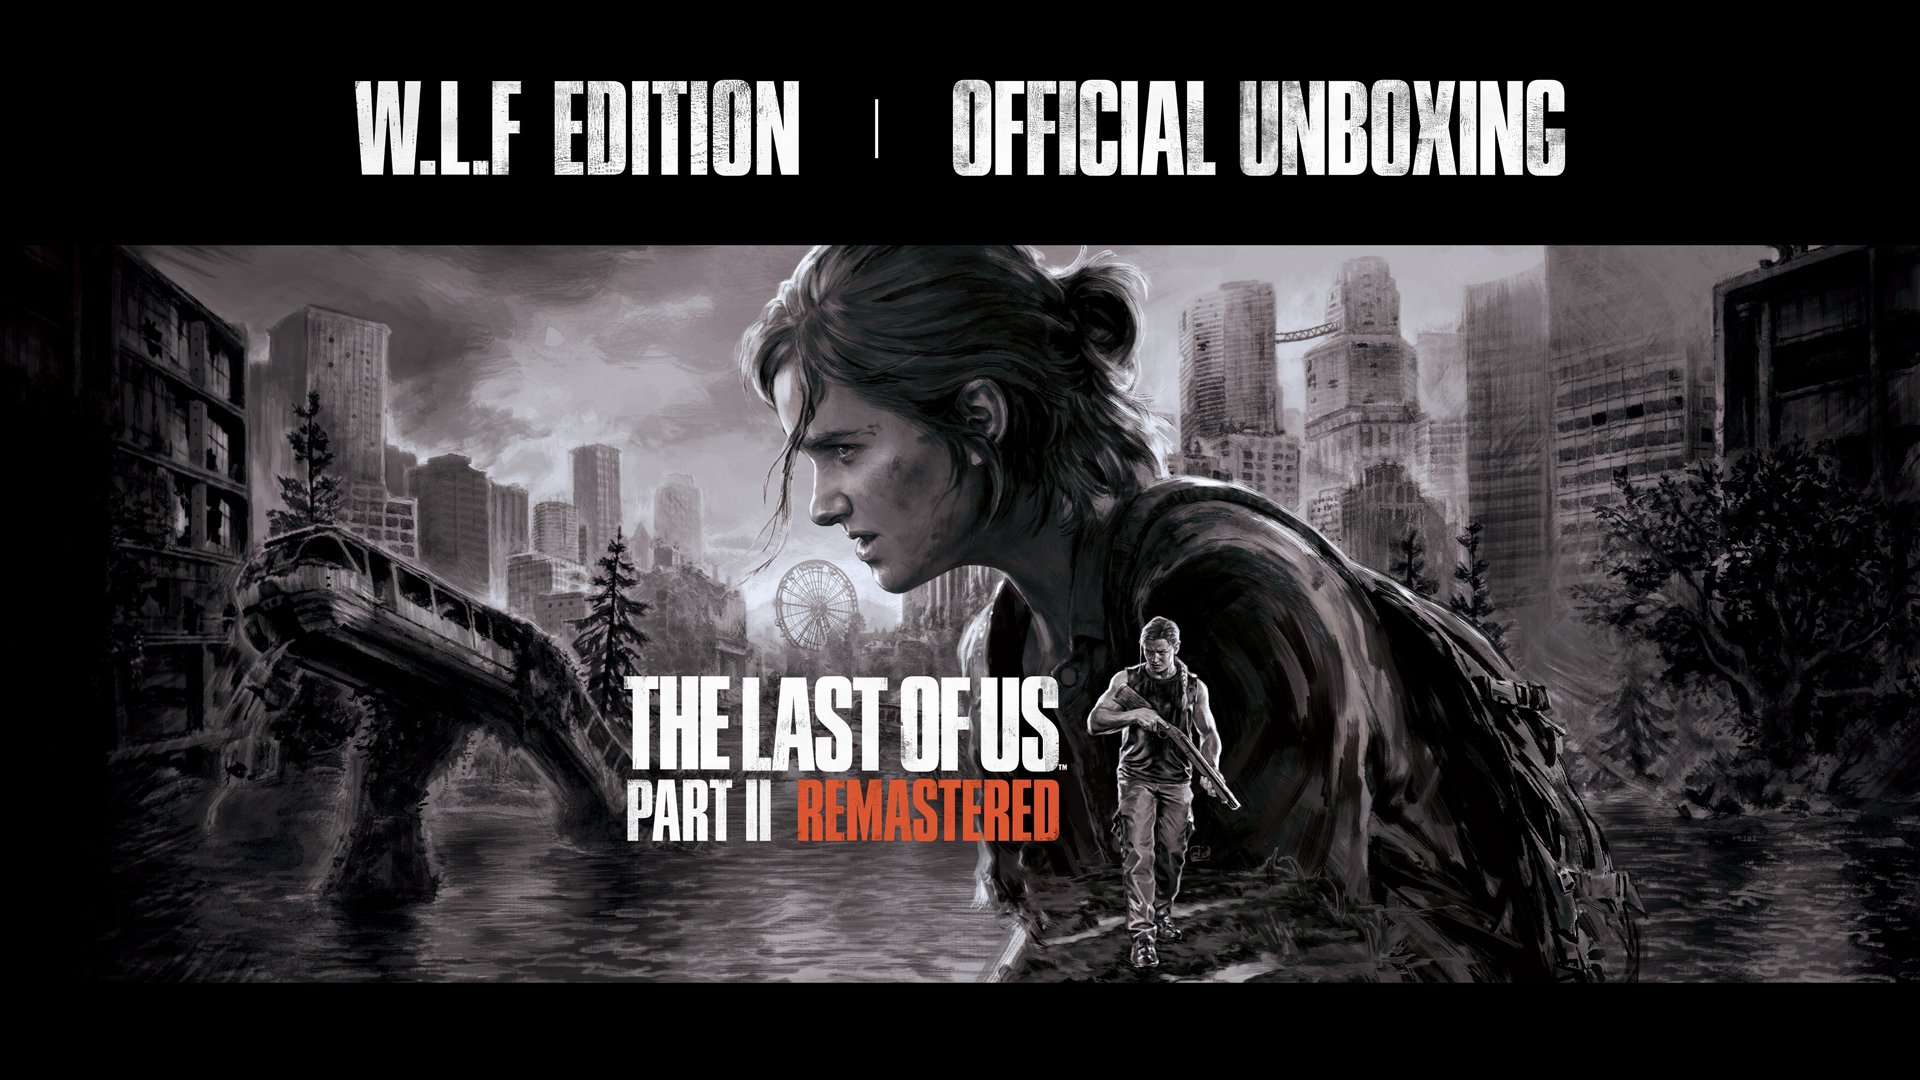 How Yall Feeling About The Last of Us Part II Remastered? #TheLastofUs, PS5 Games